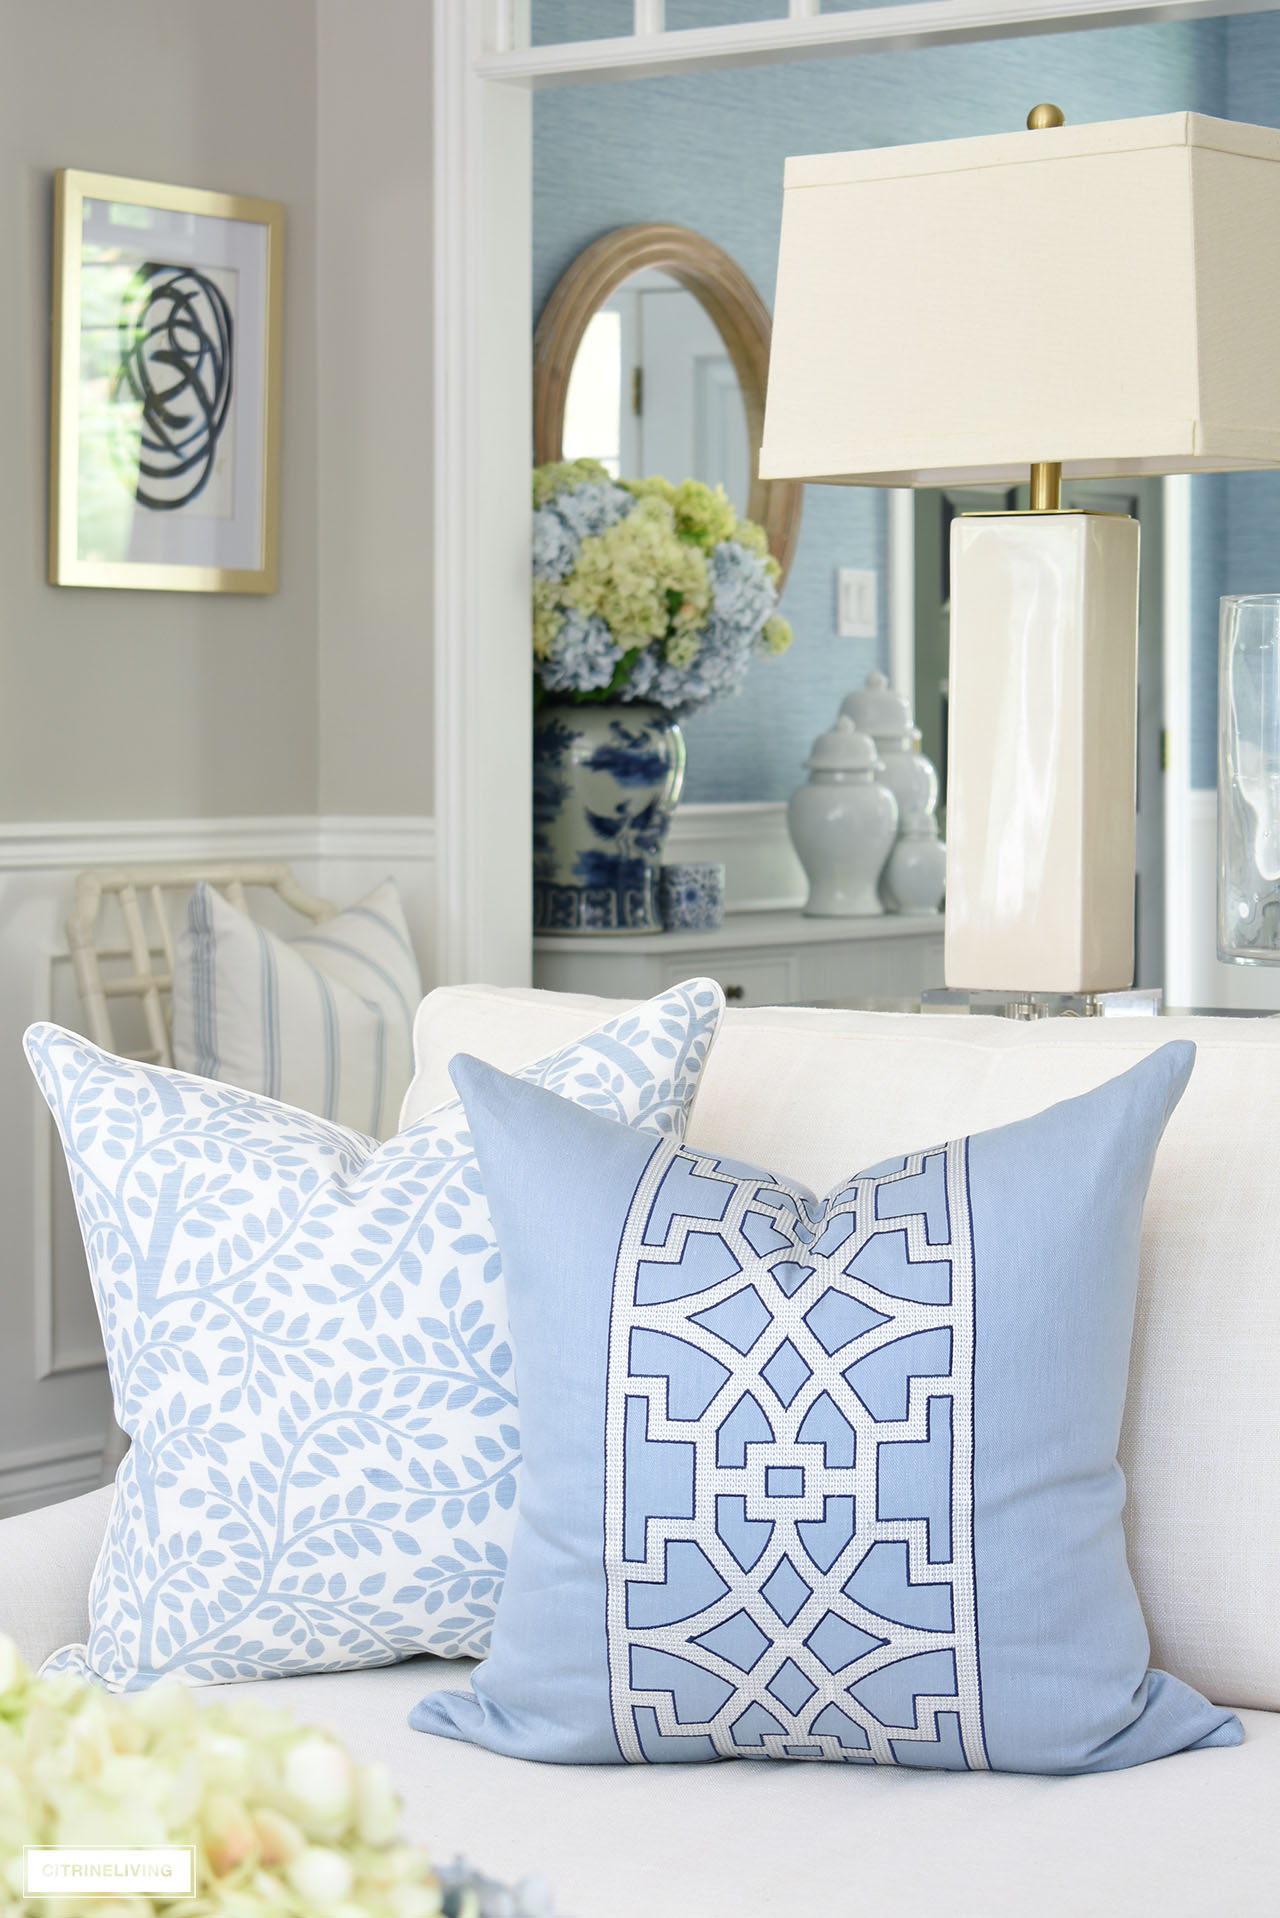 Gorgeous designer pillows in blue and white, one featuring a wide trellis detail on the front in white on a light blue ground, outlined in navy blue, while the other has a light blue allover leaf print on a white linen ground.